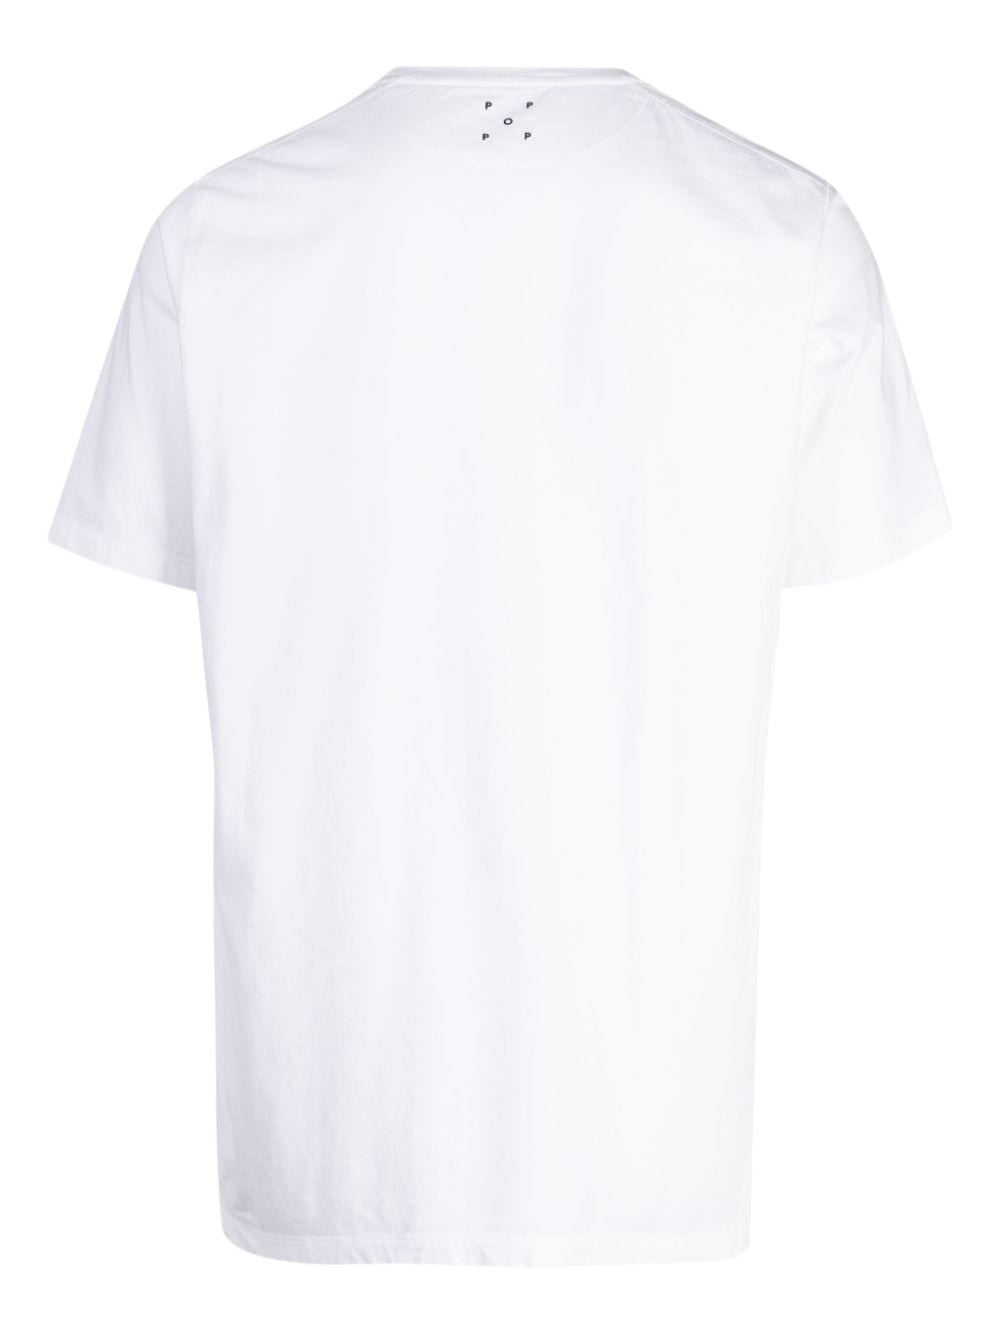 Pop Trading Company Joost Swarte cotton T-shirt - Wit